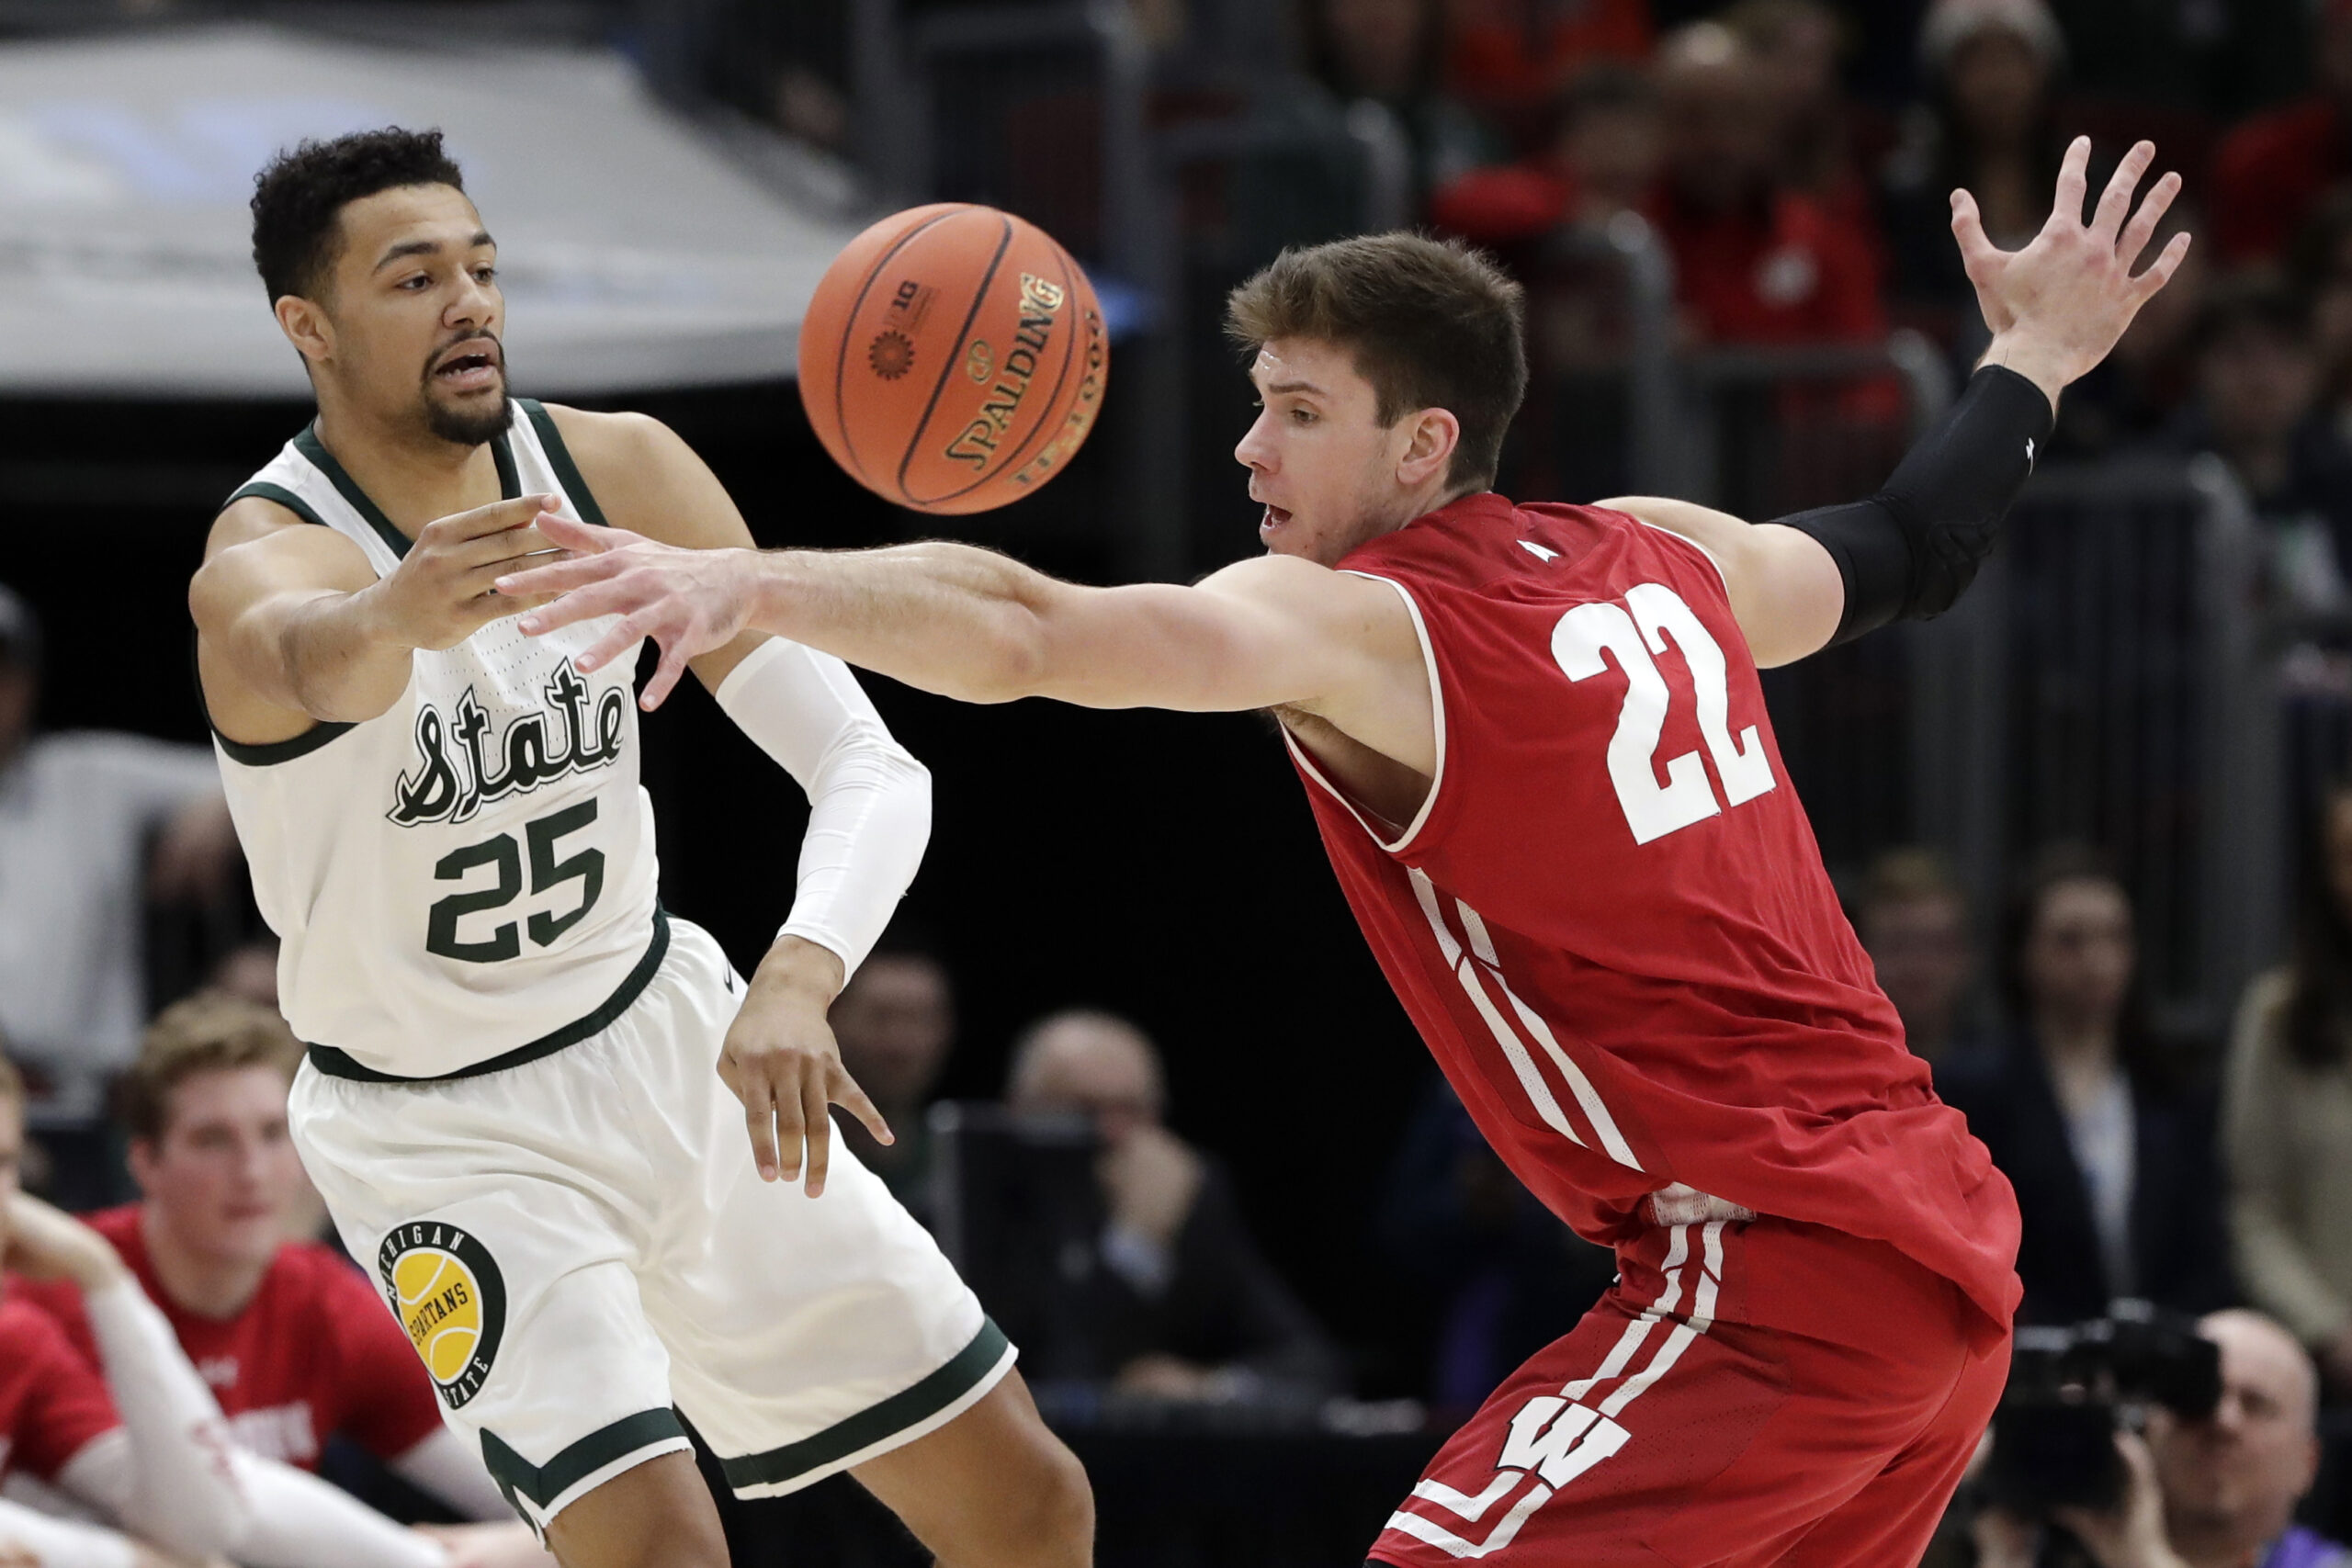 Michigan State's Kenny Goins (25) pass the ball around Wisconsin's Ethan Happ (22) during the first half of an NCAA college basketball game in the semifinals of the Big Ten Conference tournament